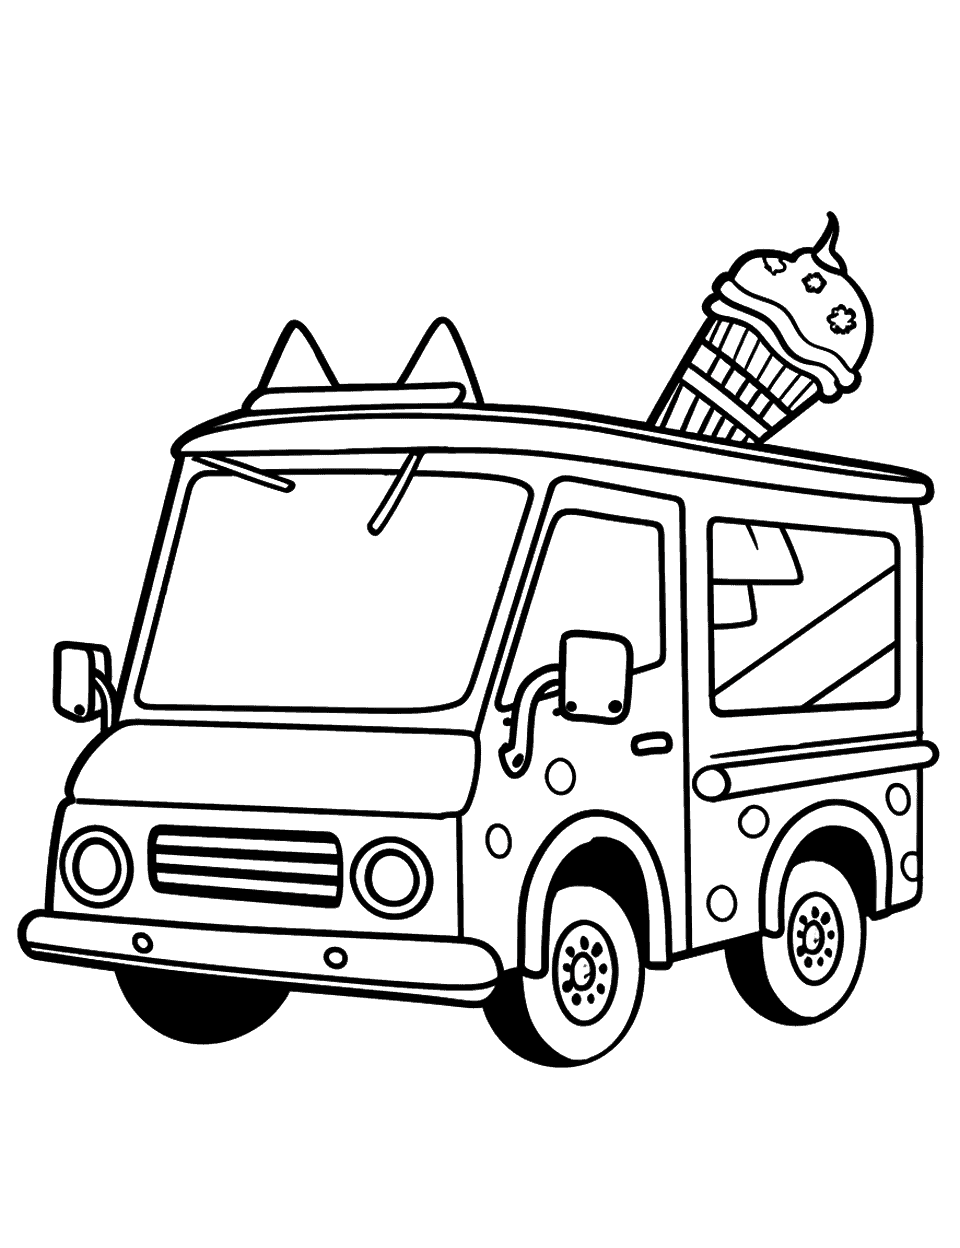 Ice Cream Truck Toddler Coloring Page - An ice cream truck with a simple design.